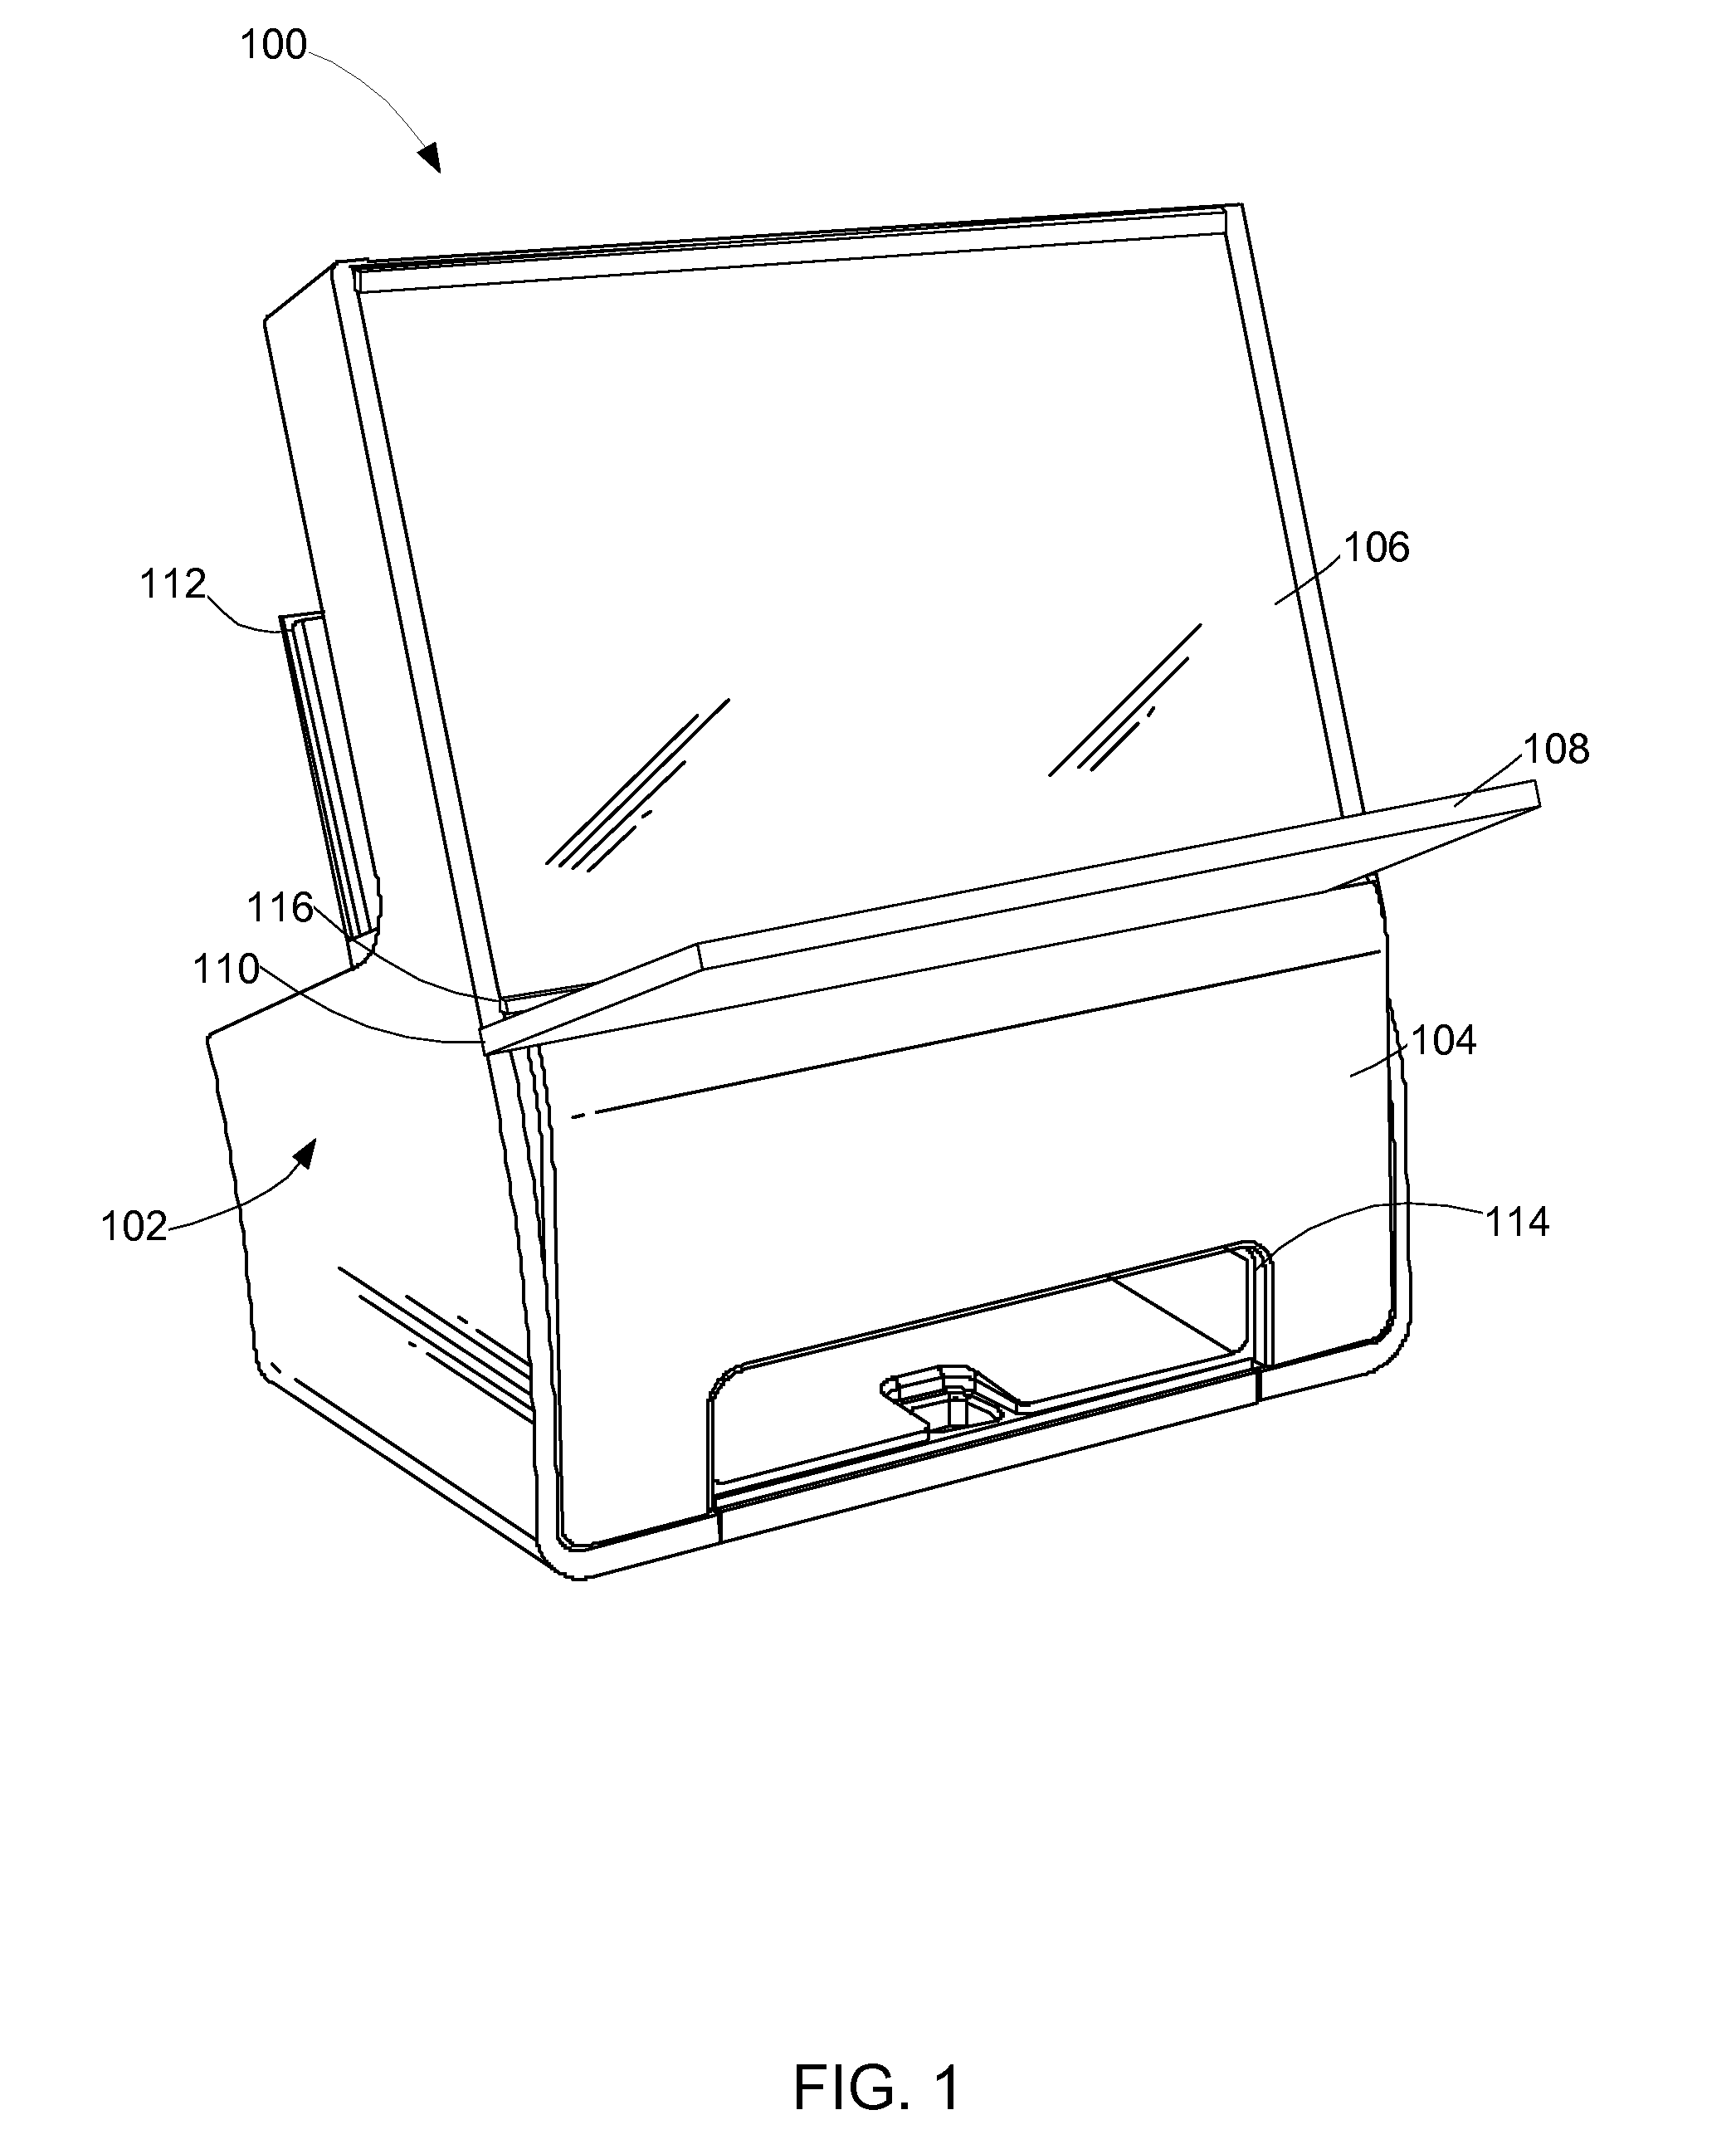 Method and System for Performing an Imaging Function by an Imaging Device